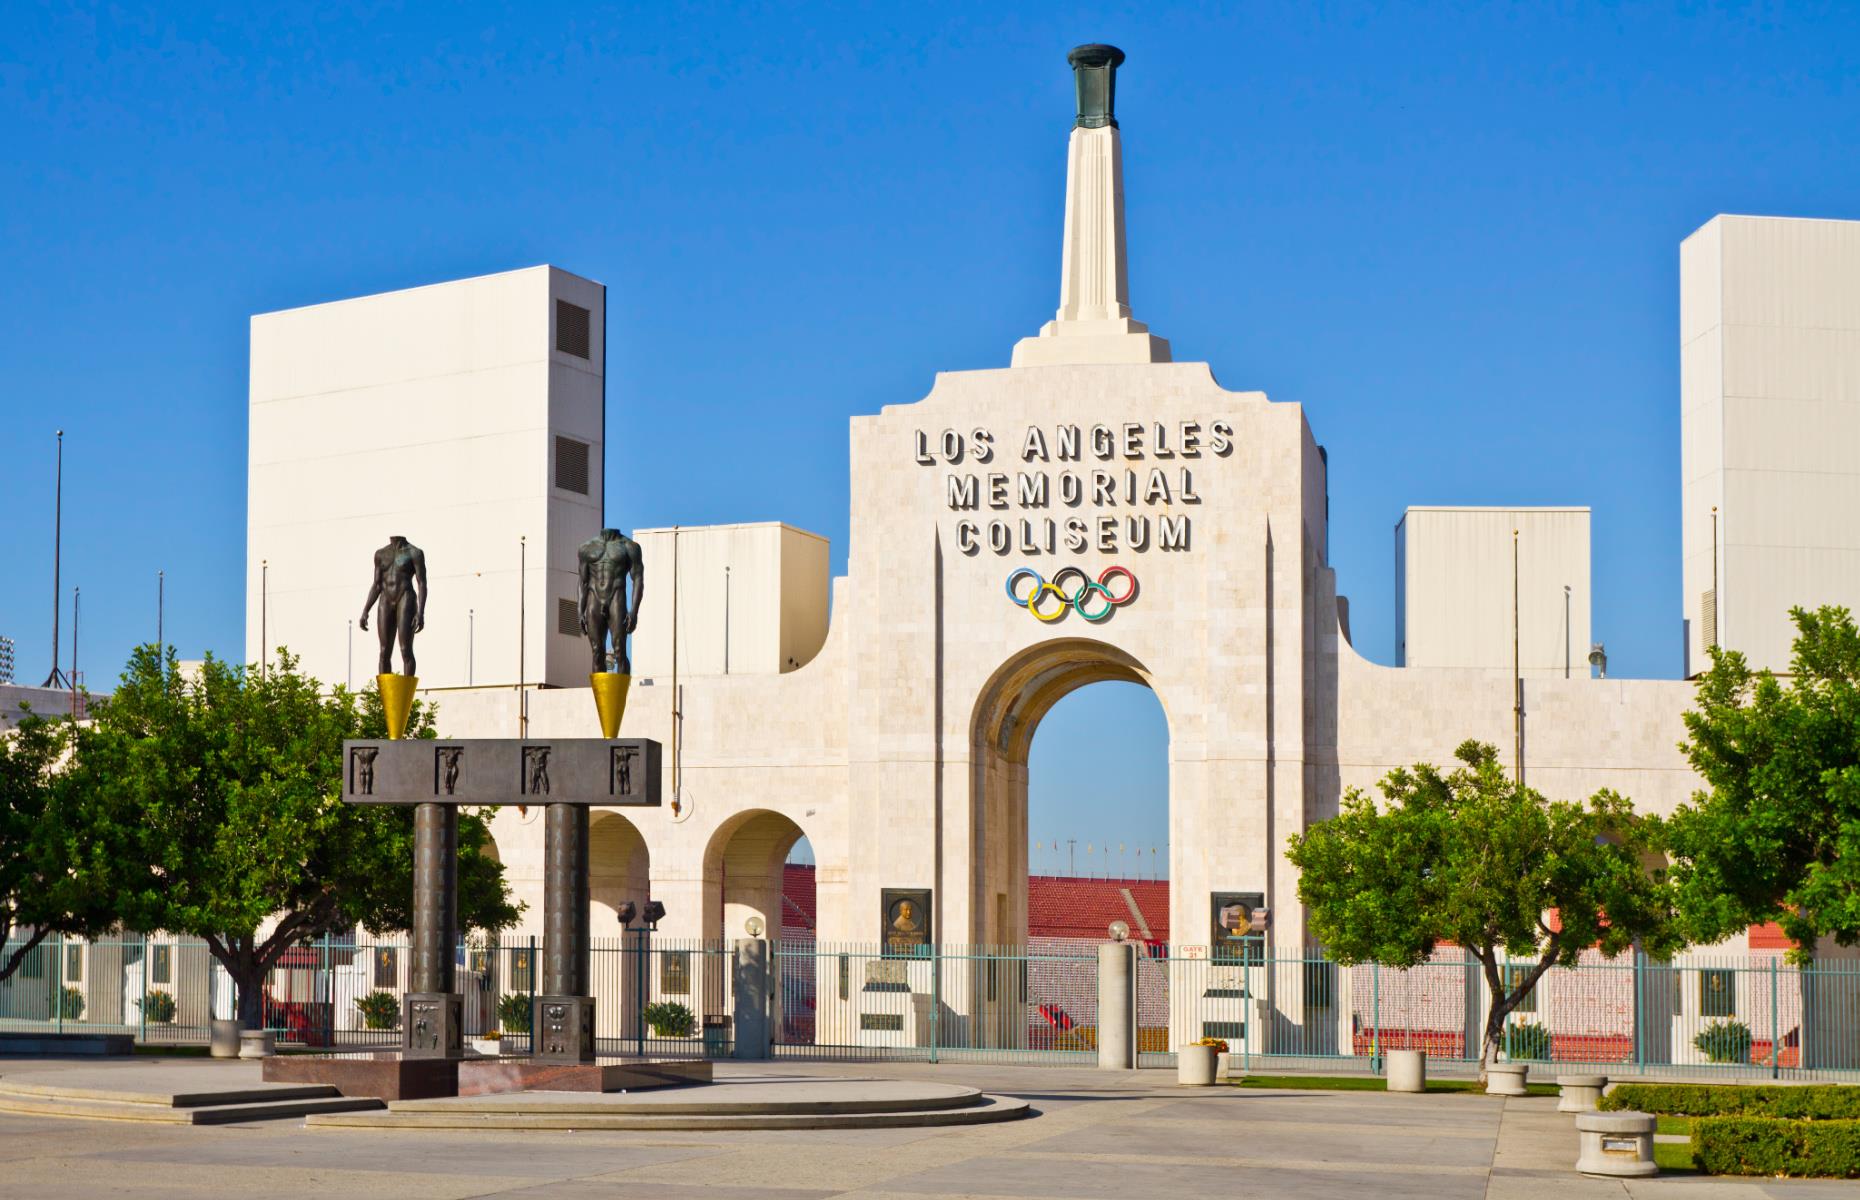 <p>The <a href="https://www.lacoliseum.com/timeline/">Los Angeles Memorial Coliseum</a> is probably best known for its connection to the Olympics (it hosted events in 1932 and 1984 and is scheduled for another go in 2028). But it was conceived as a tribute to veterans of the First World War. It’s been the site of many major events over the last 100 years: in addition to the Olympics, Charles Lindbergh put on an air show in 1927, Dr. Martin Luther King Jr. gave a speech here in 1964, and it was home to the first Super Bowl in 1967.</p>